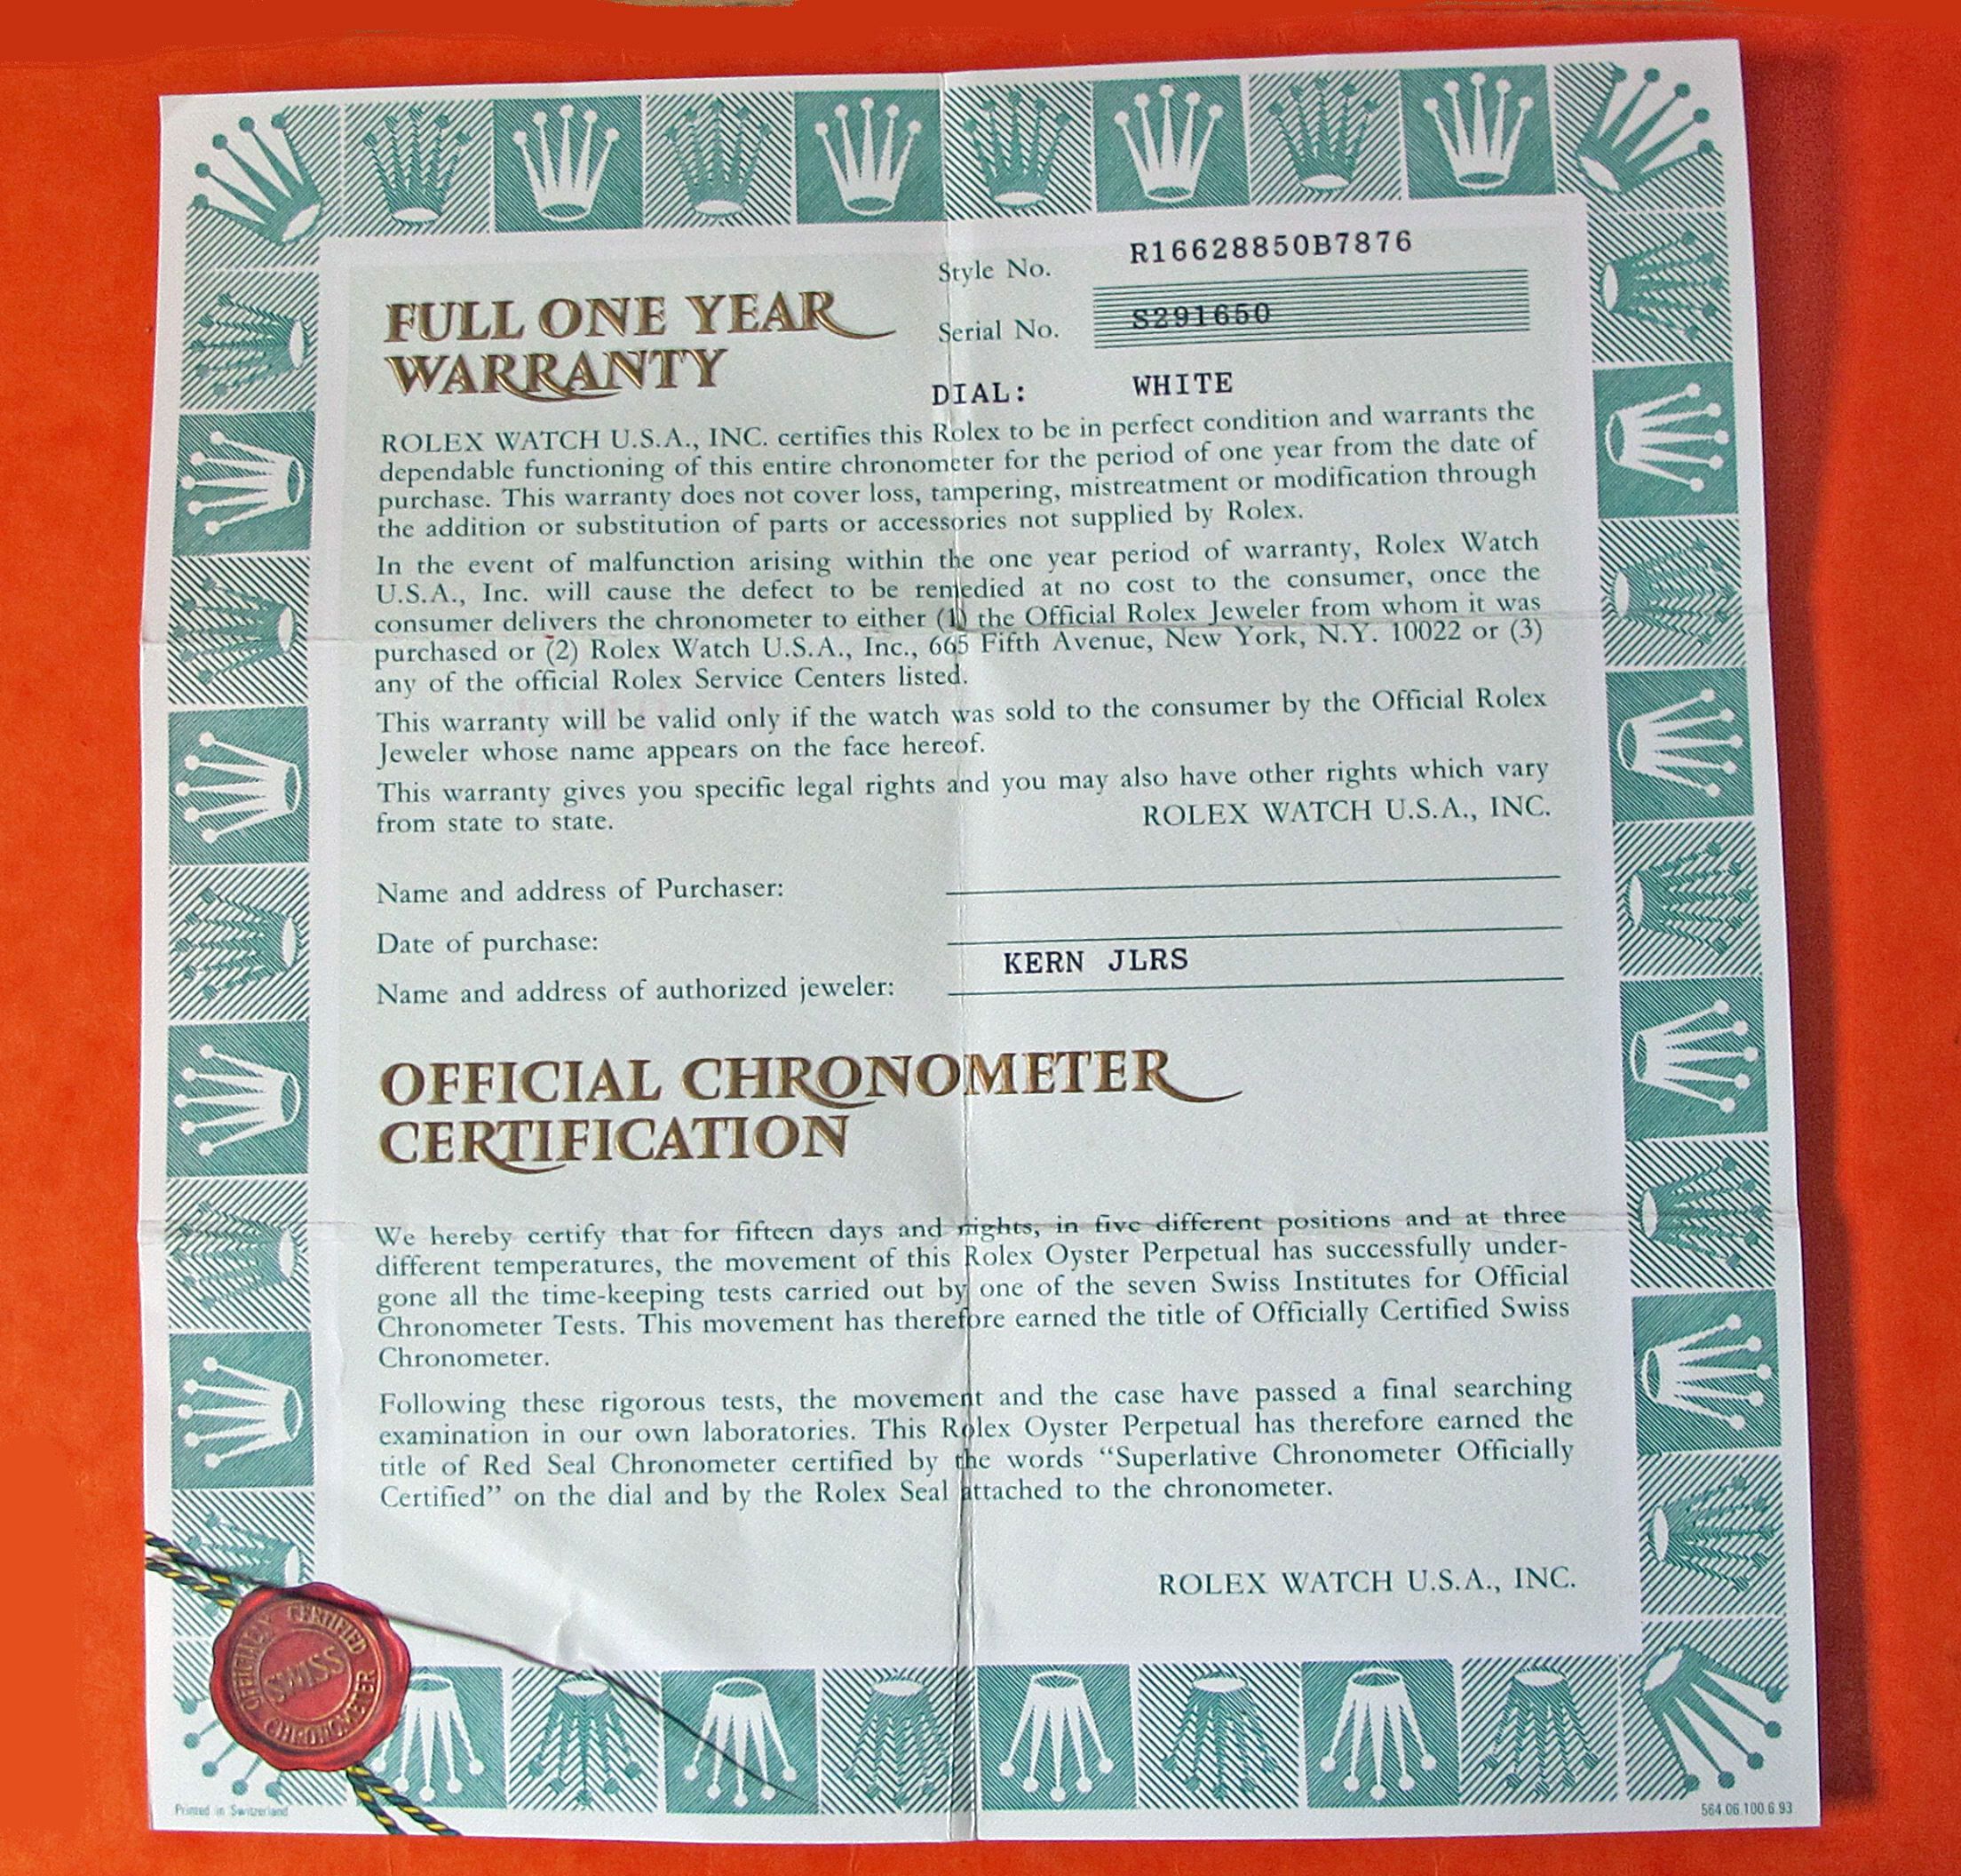 100% Authentic ROLEX OEM Vintage Guarantee Papers Certificate Gmt